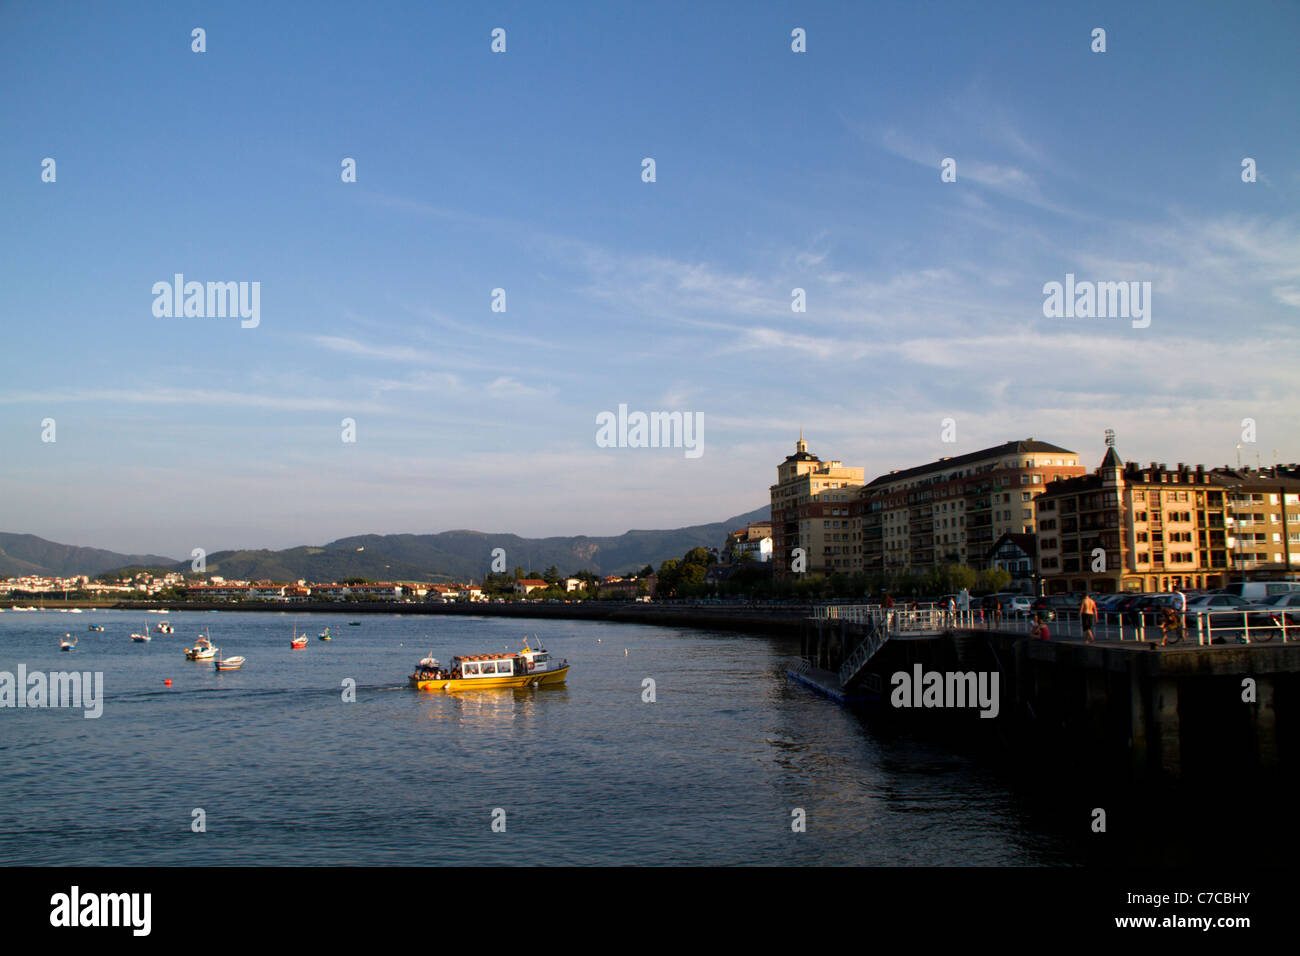 Hondarribia in the Basque country. Stock Photo